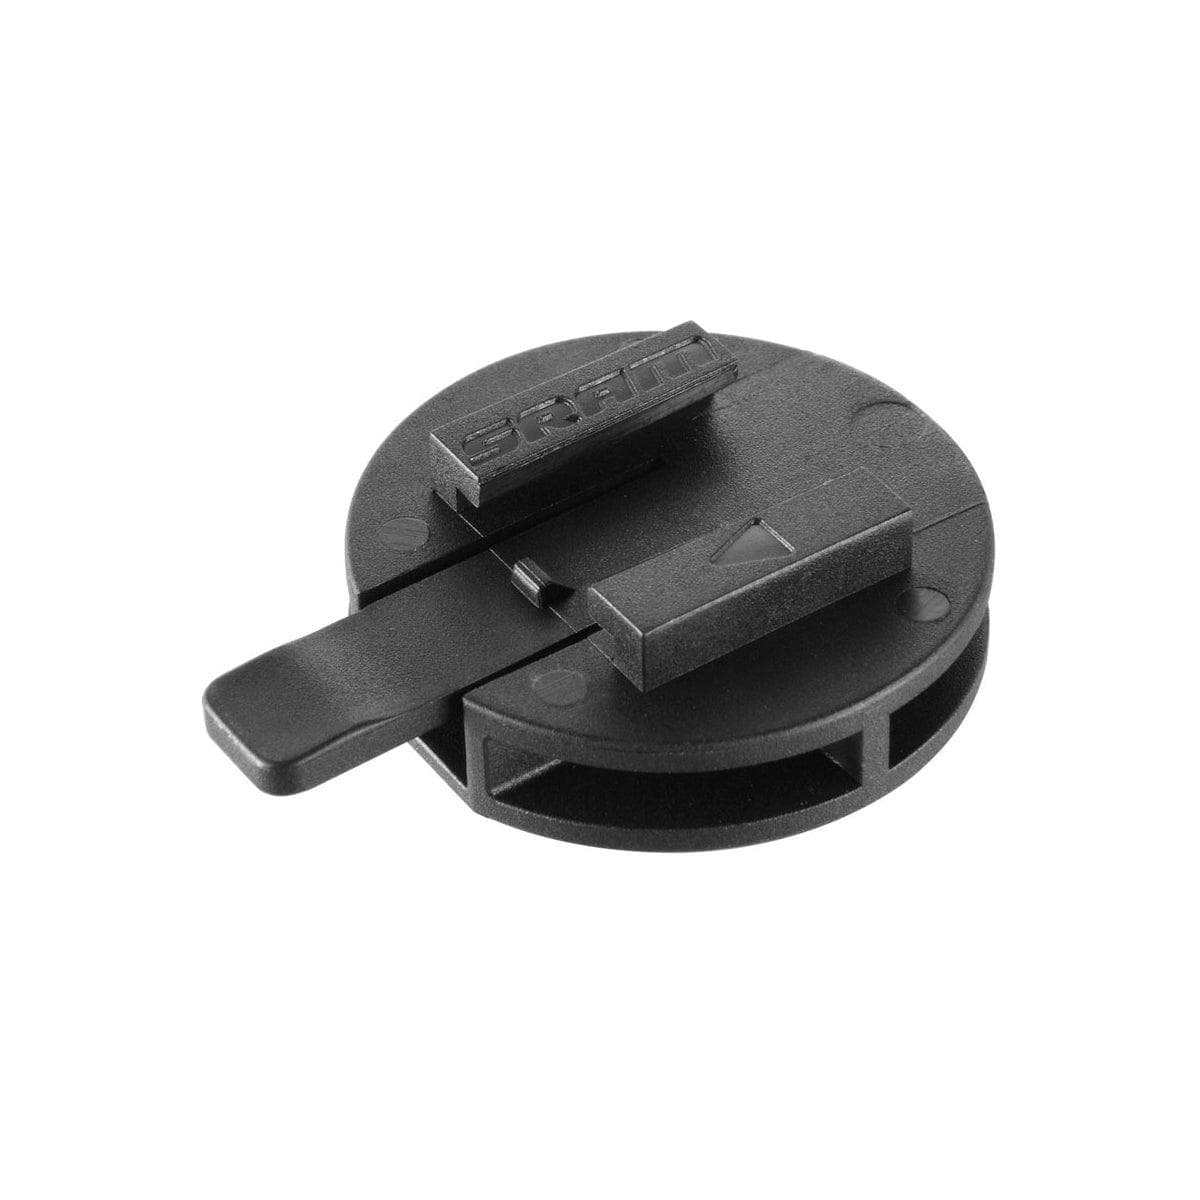 Sram Quickview Garmin Gps/Computer Mount Adaptor - Quarter Turn To Slide Lock (Use With 605 And 705):